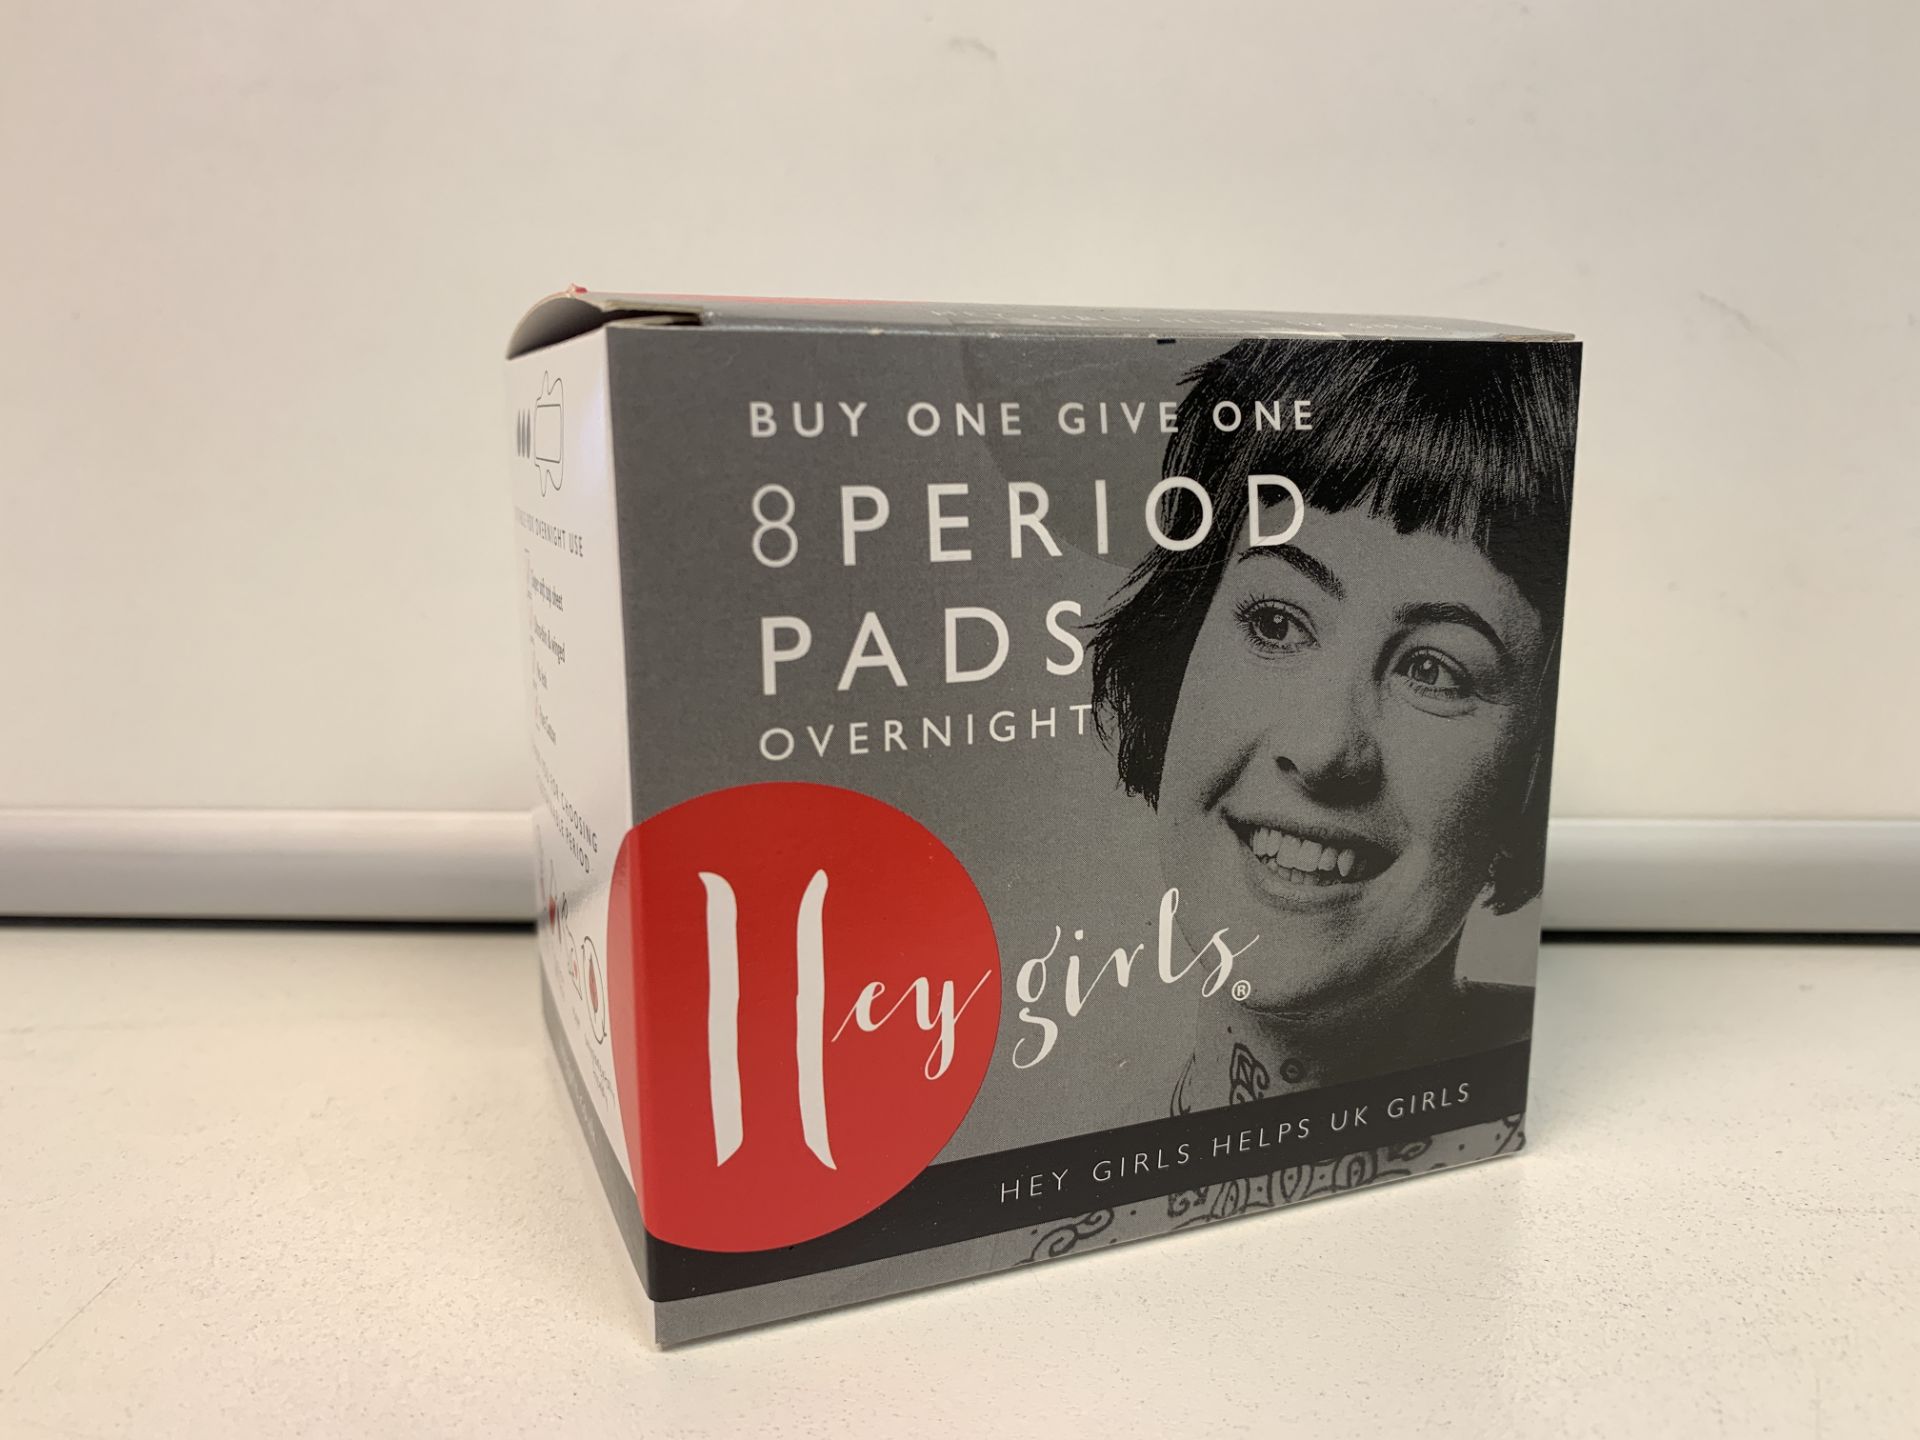 96 X BRAND NEW PACKS OF 8 HEY GIRLS OVERNIGHT PERIOD PADS IN 4 BOXES R2